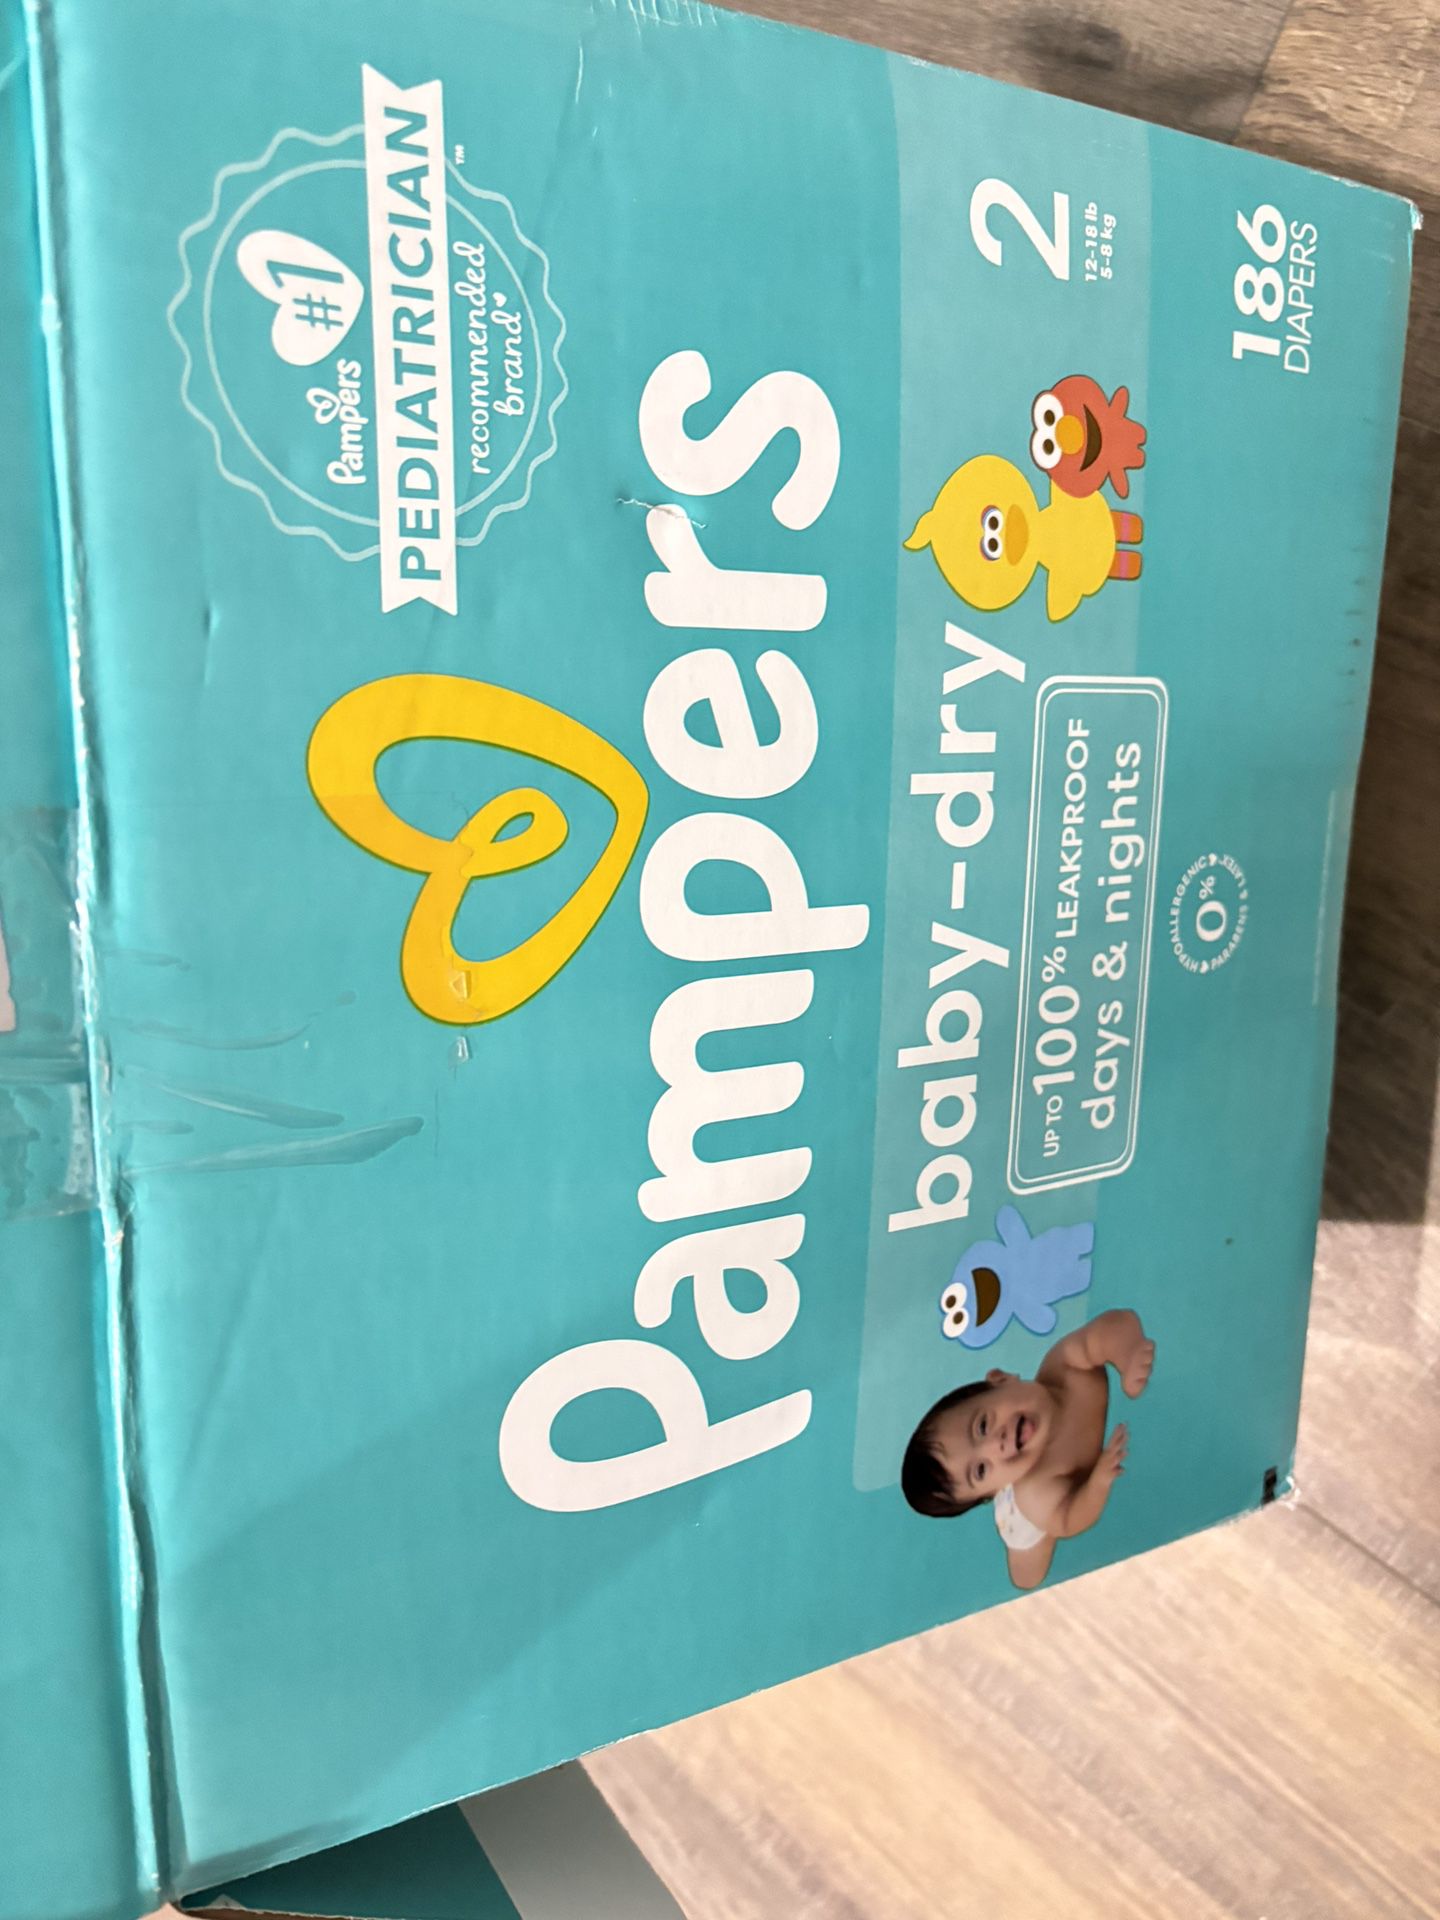 Size 1 Pampers 